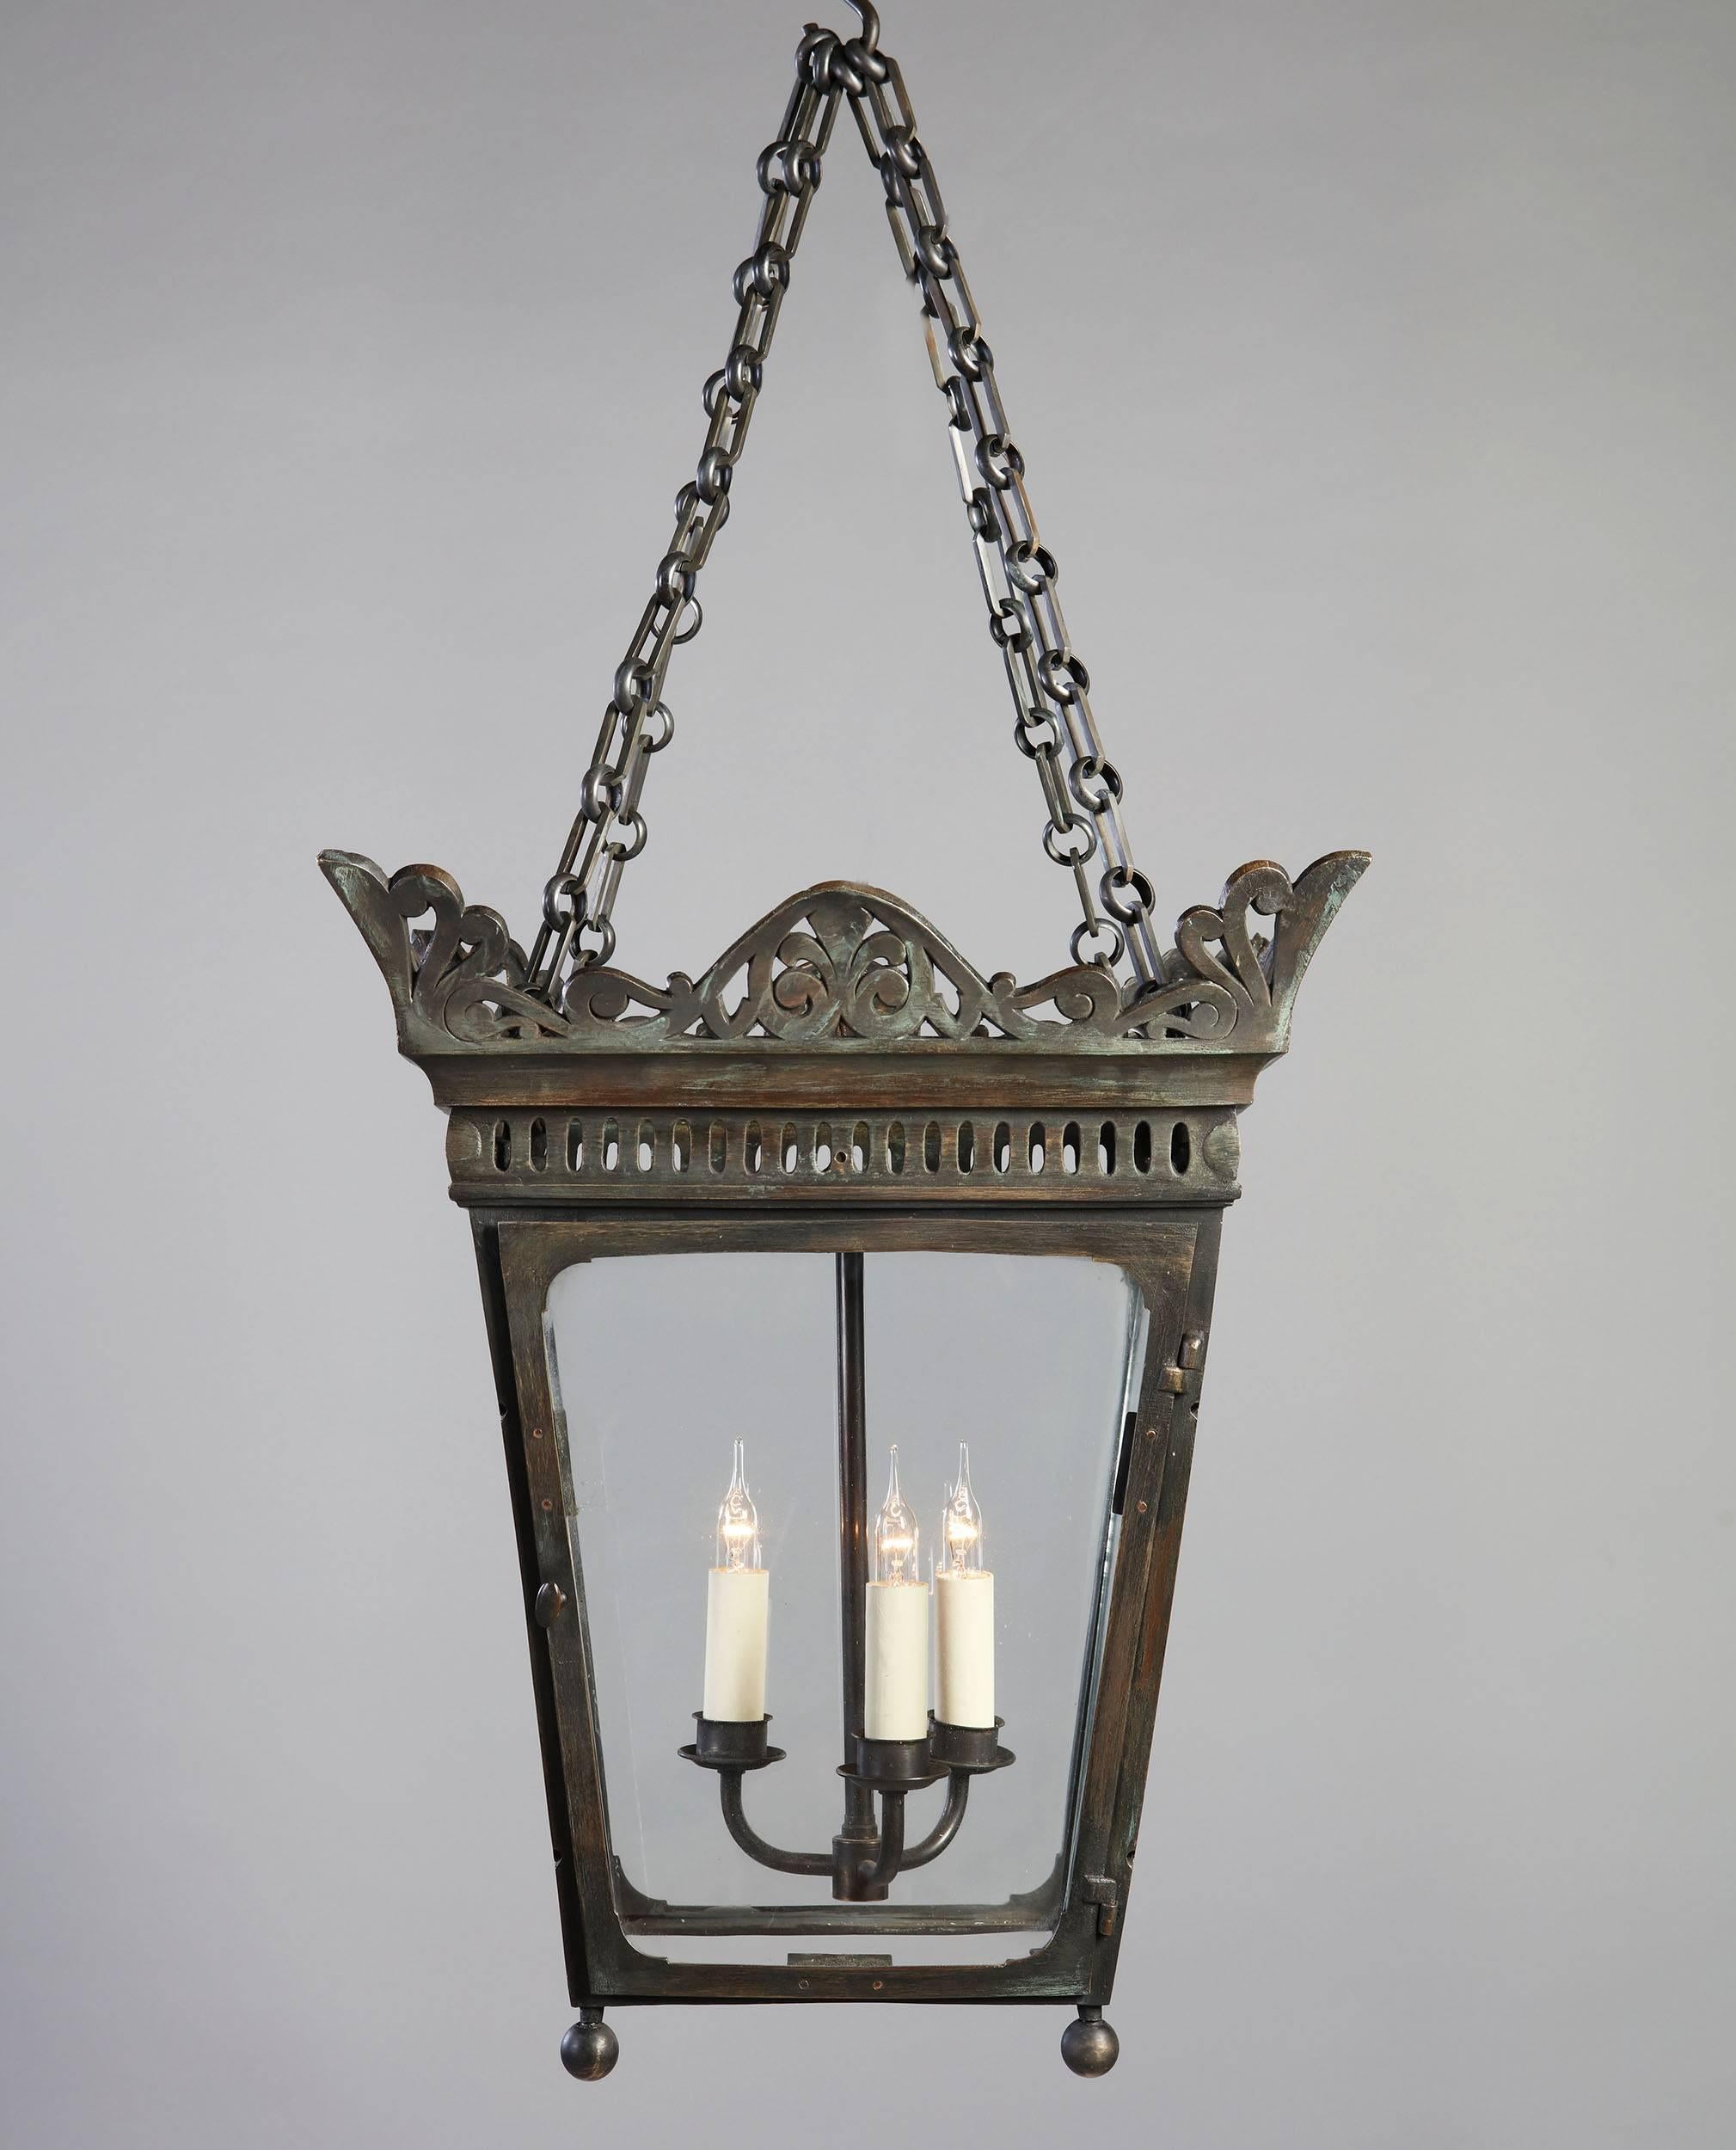 An early 19th century bronze hanging lantern with pierced cresting.